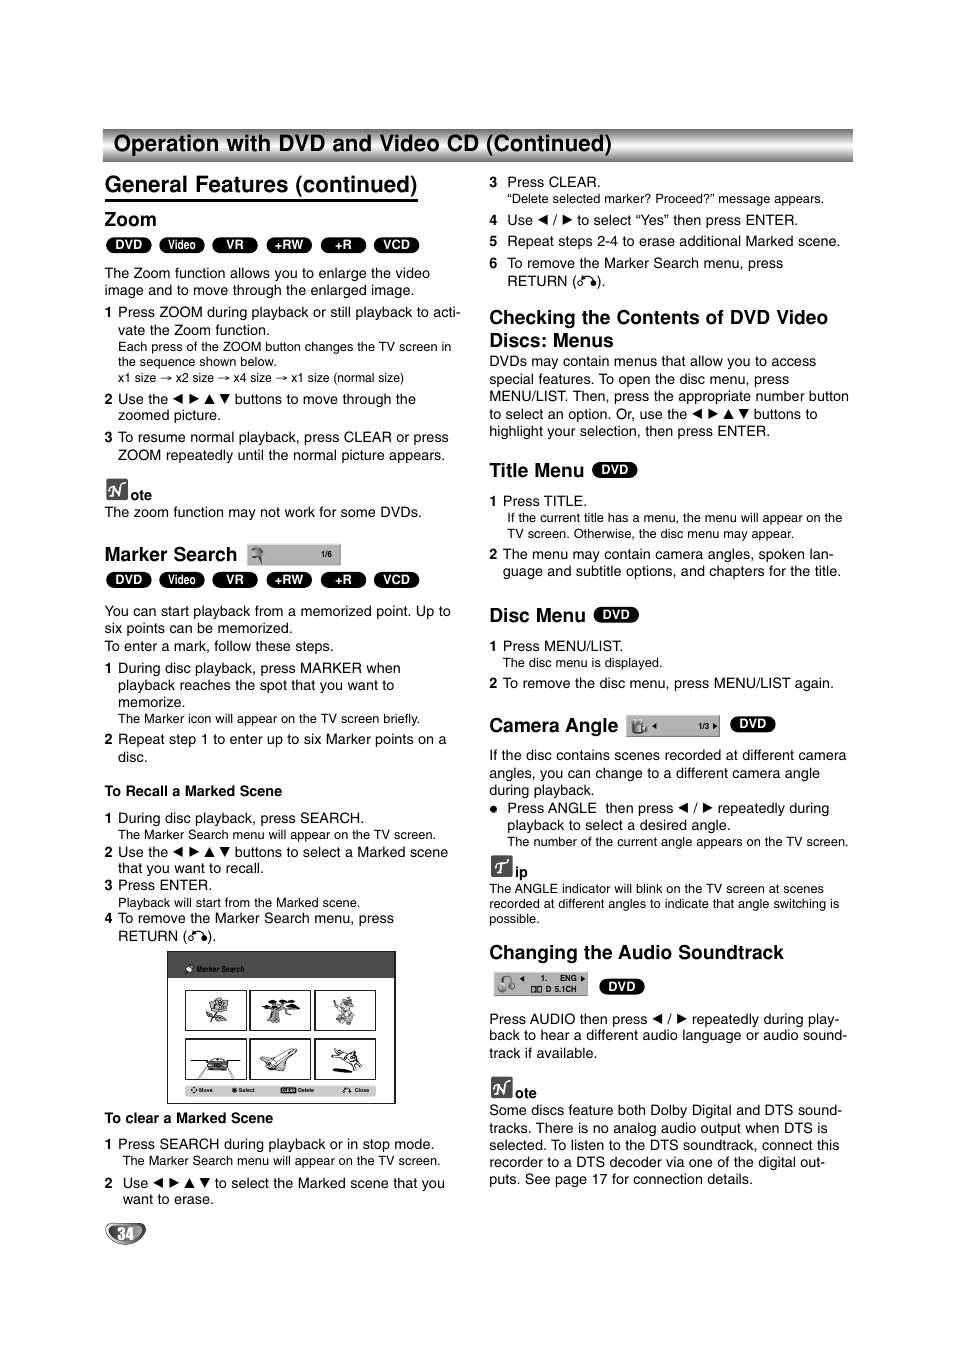 Zoom, Marker search, Checking the contents of dvd video discs: menus | Title menu, Disc menu, Camera angle, Changing the audio soundtrack | LG DR4912 User Manual | Page 34 / 64